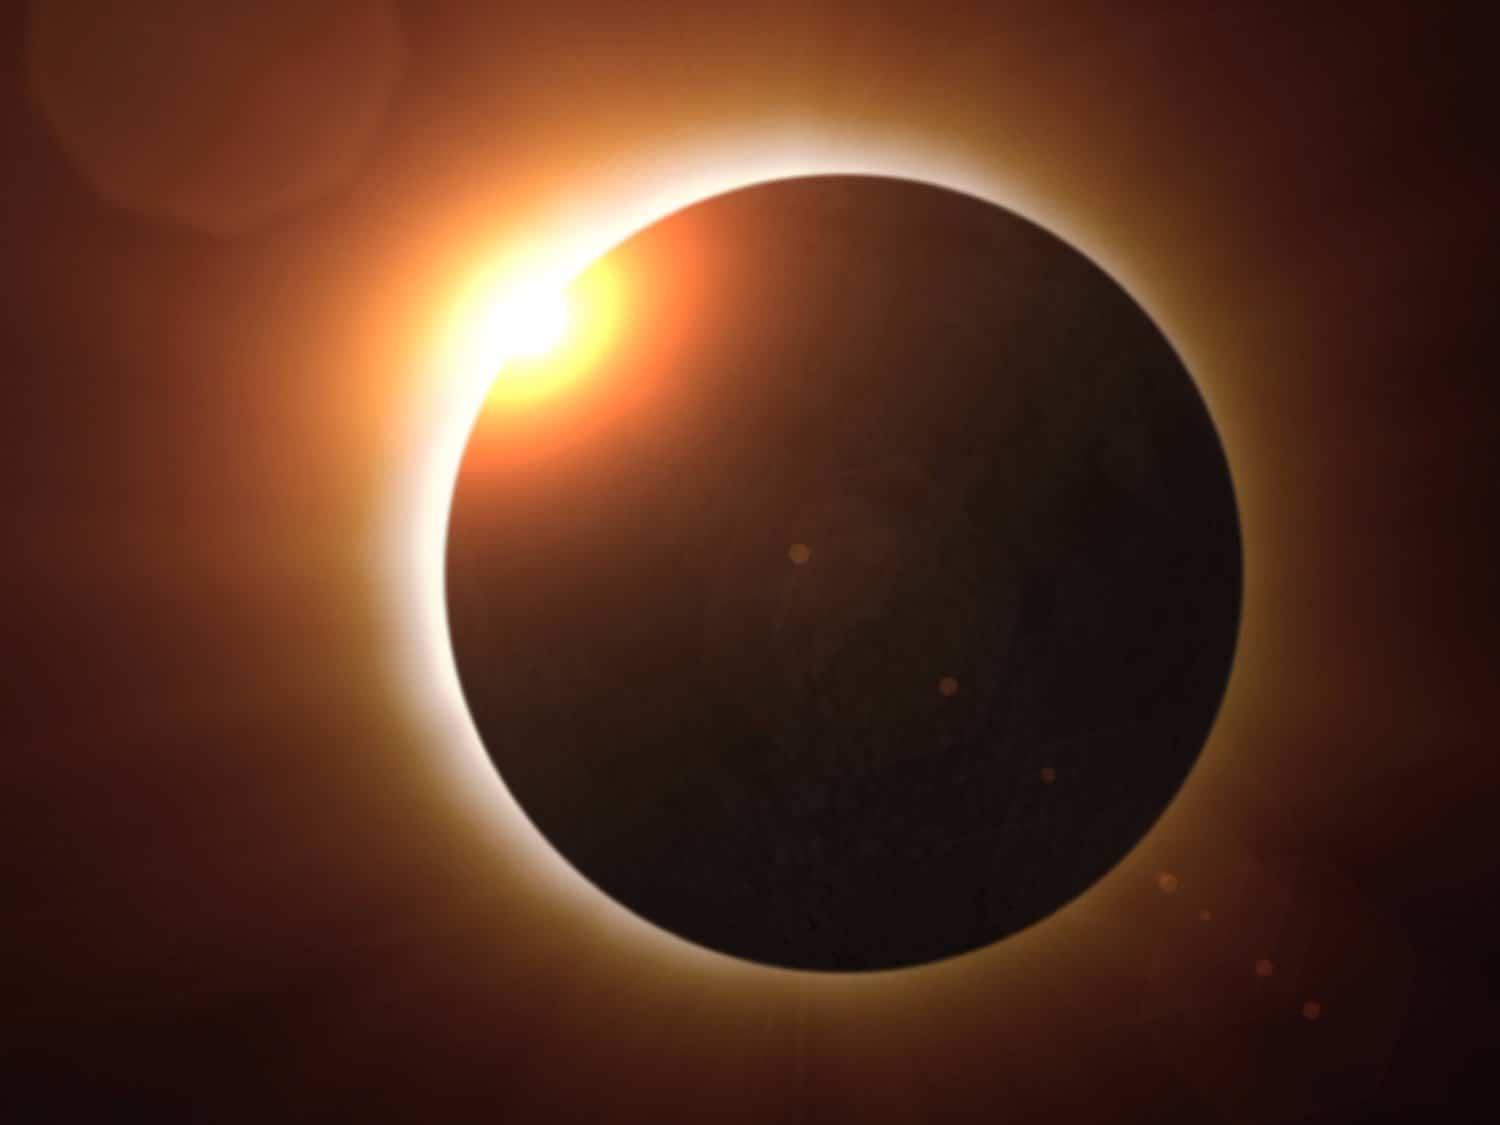 August 21, 2017 Total Solar Eclipse Aftershock (Video)